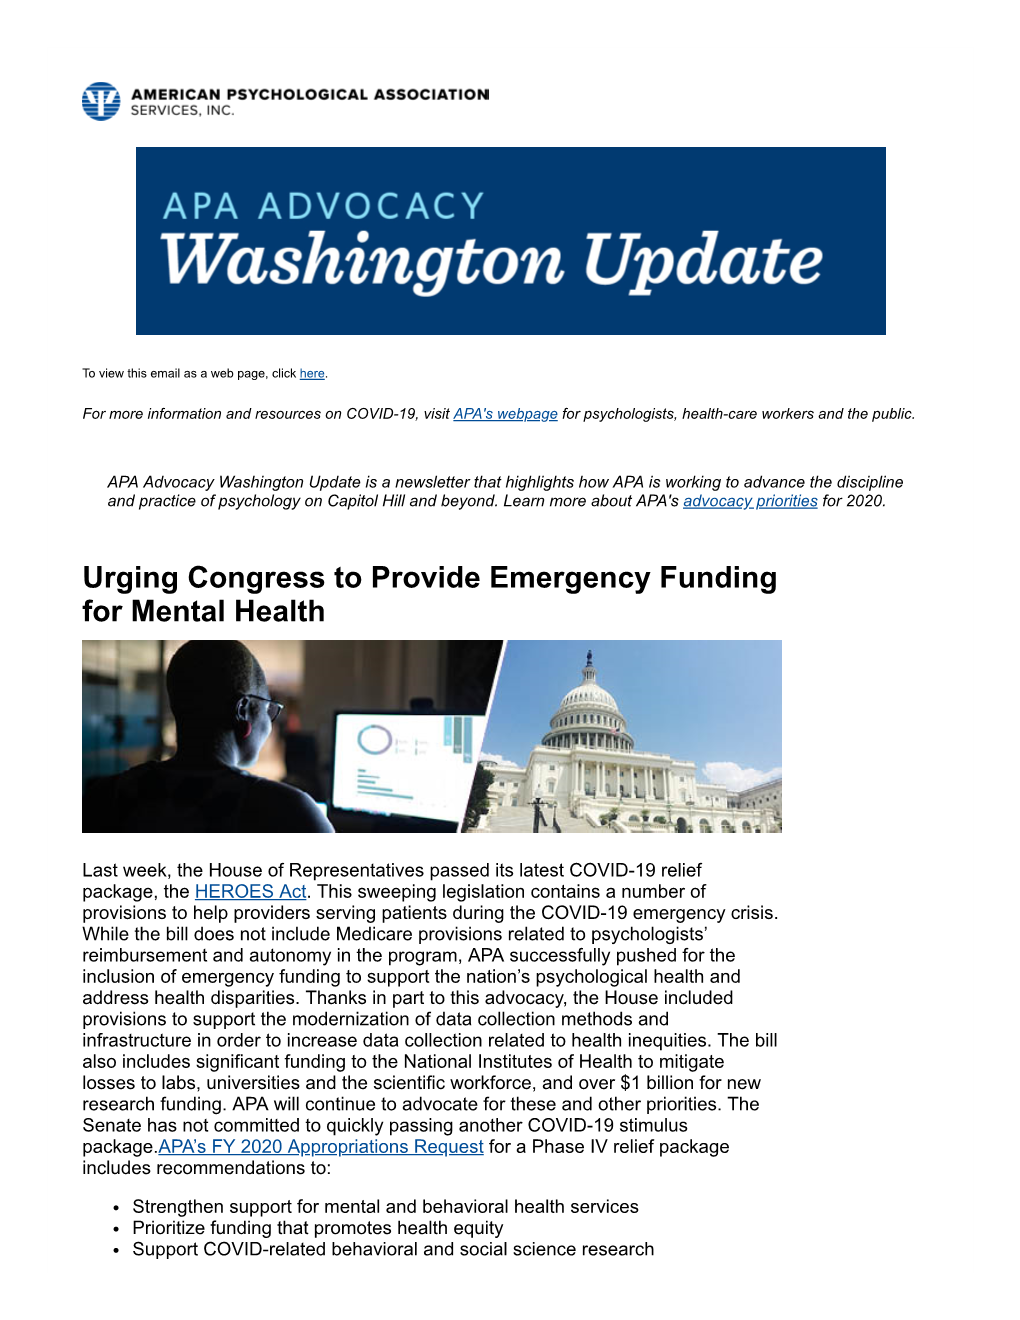 Urging Congress to Provide Emergency Funding for Mental Health